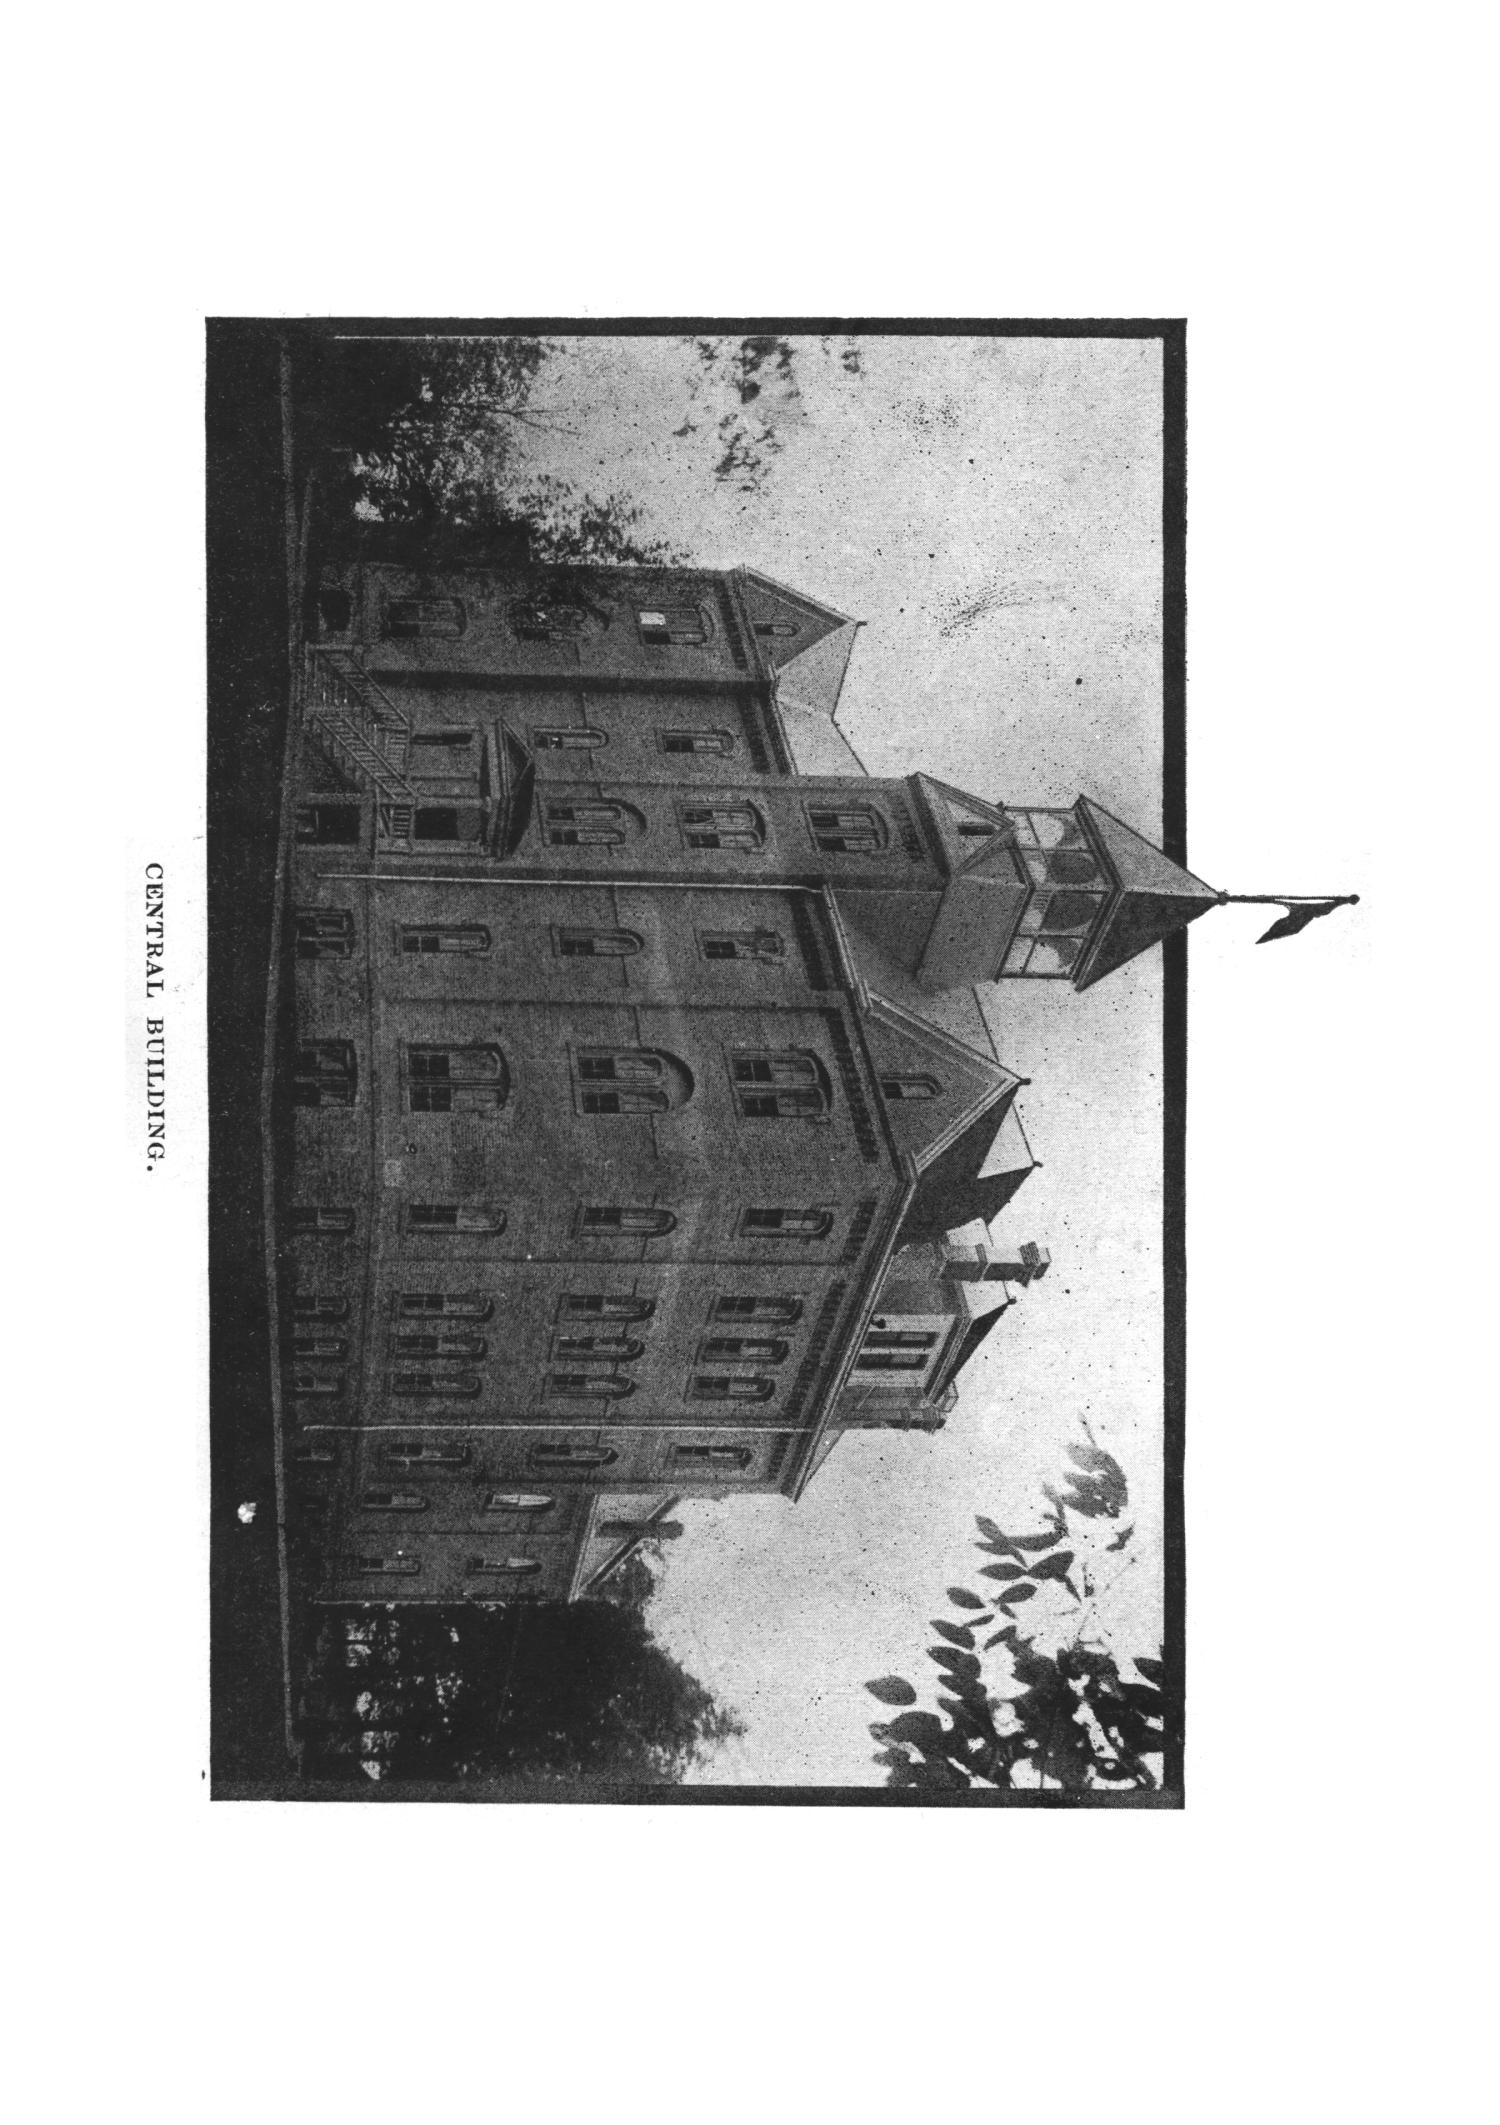 Yearbook of Wiley University, 1902
                                                
                                                    None
                                                